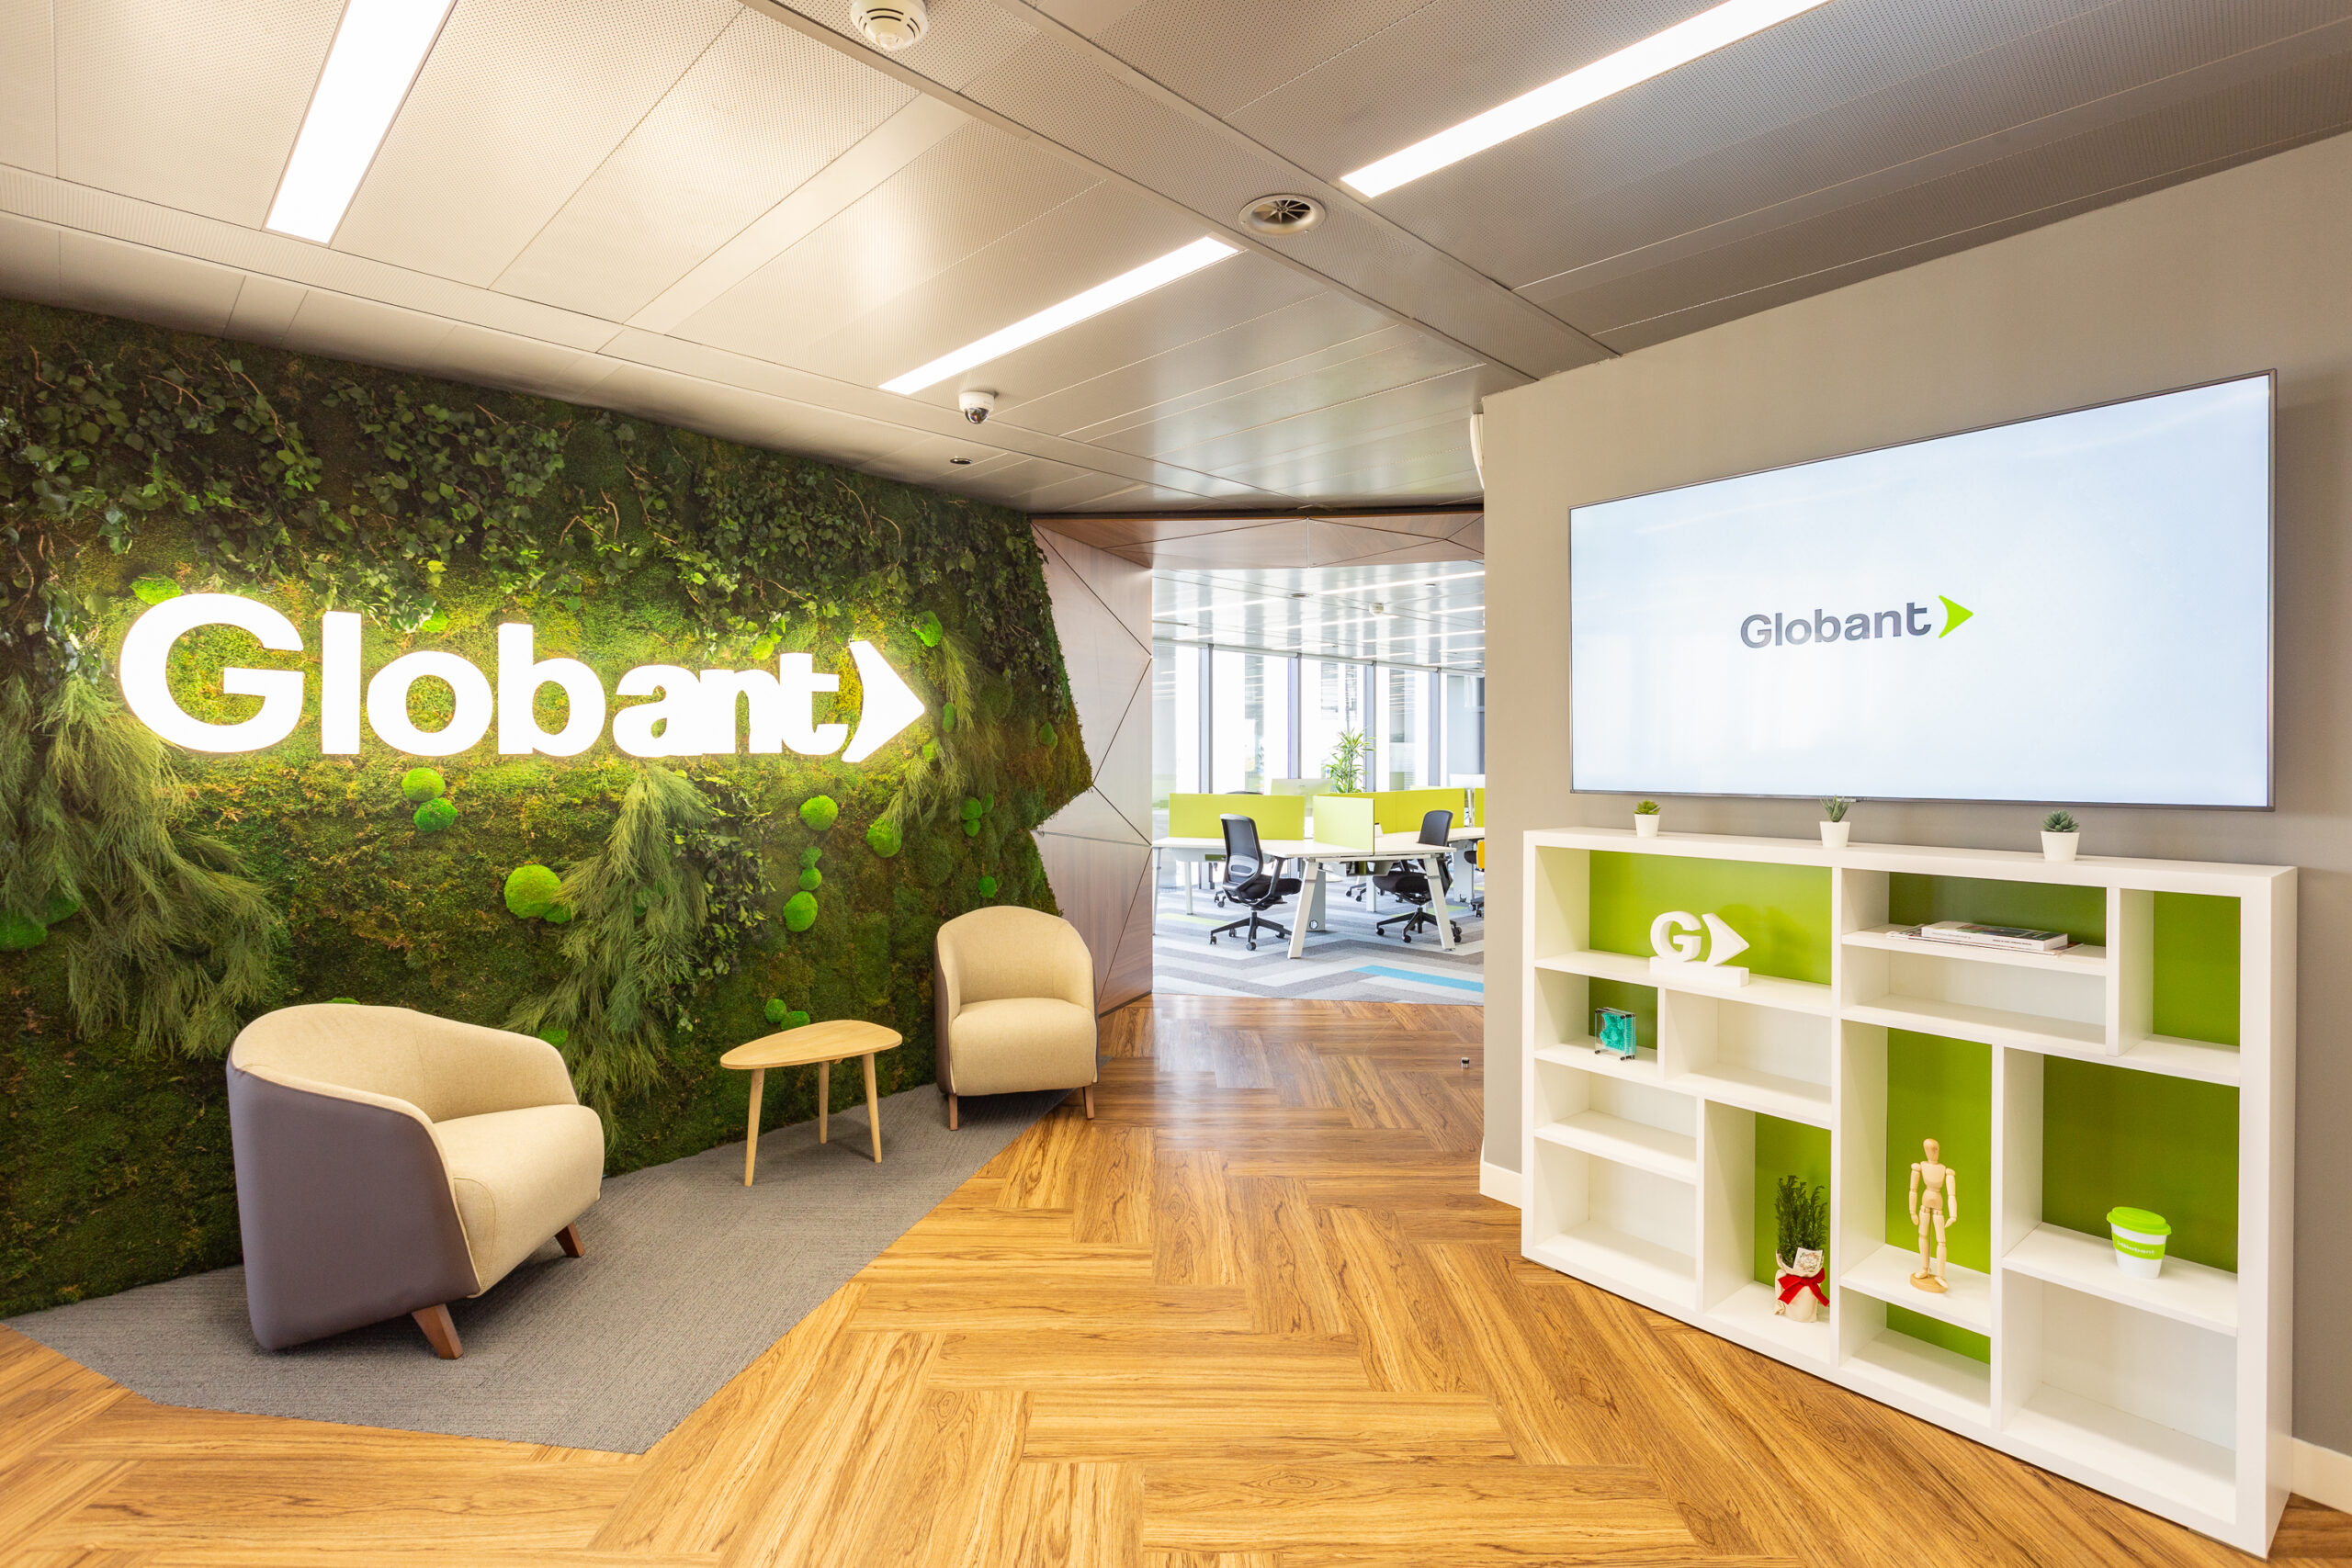 globant madrid: new office as part of the expansion | globant blog